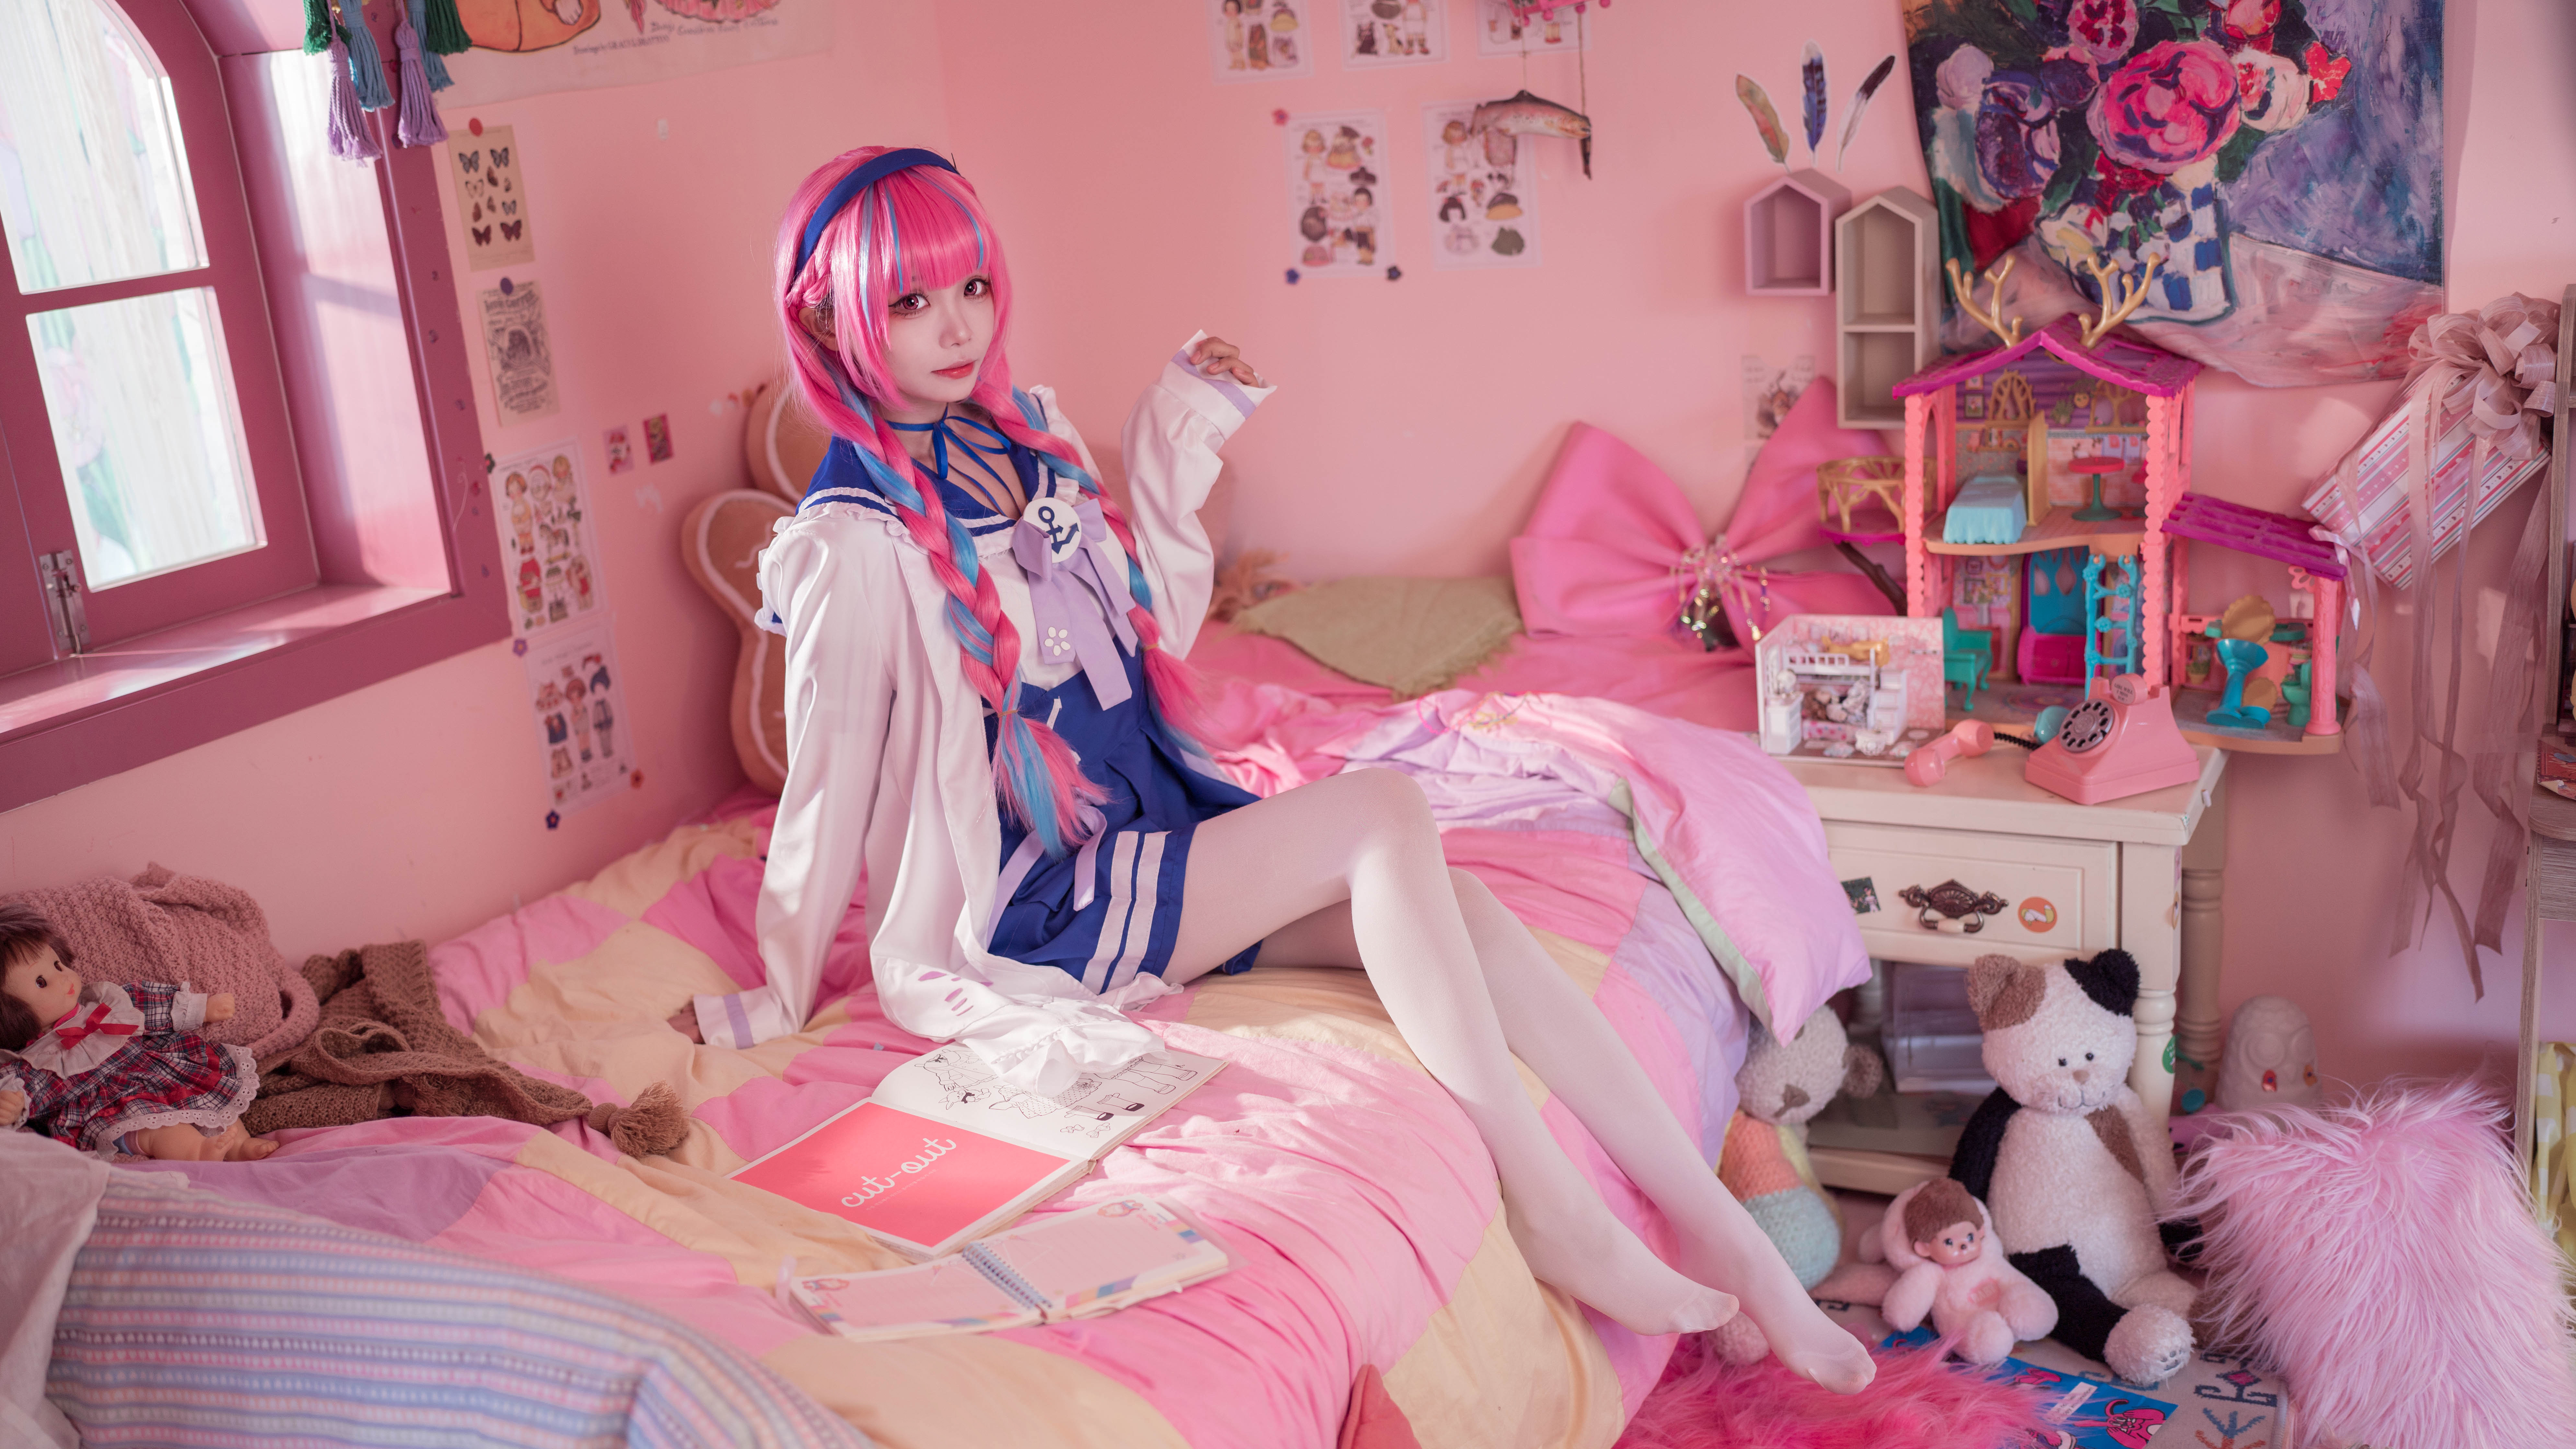 People 7952x4472 Minato Aqua pink hair white stockings Asian cosplay maid outfit women legs feet indoors petite aegyo sal two tone hair sitting on bed